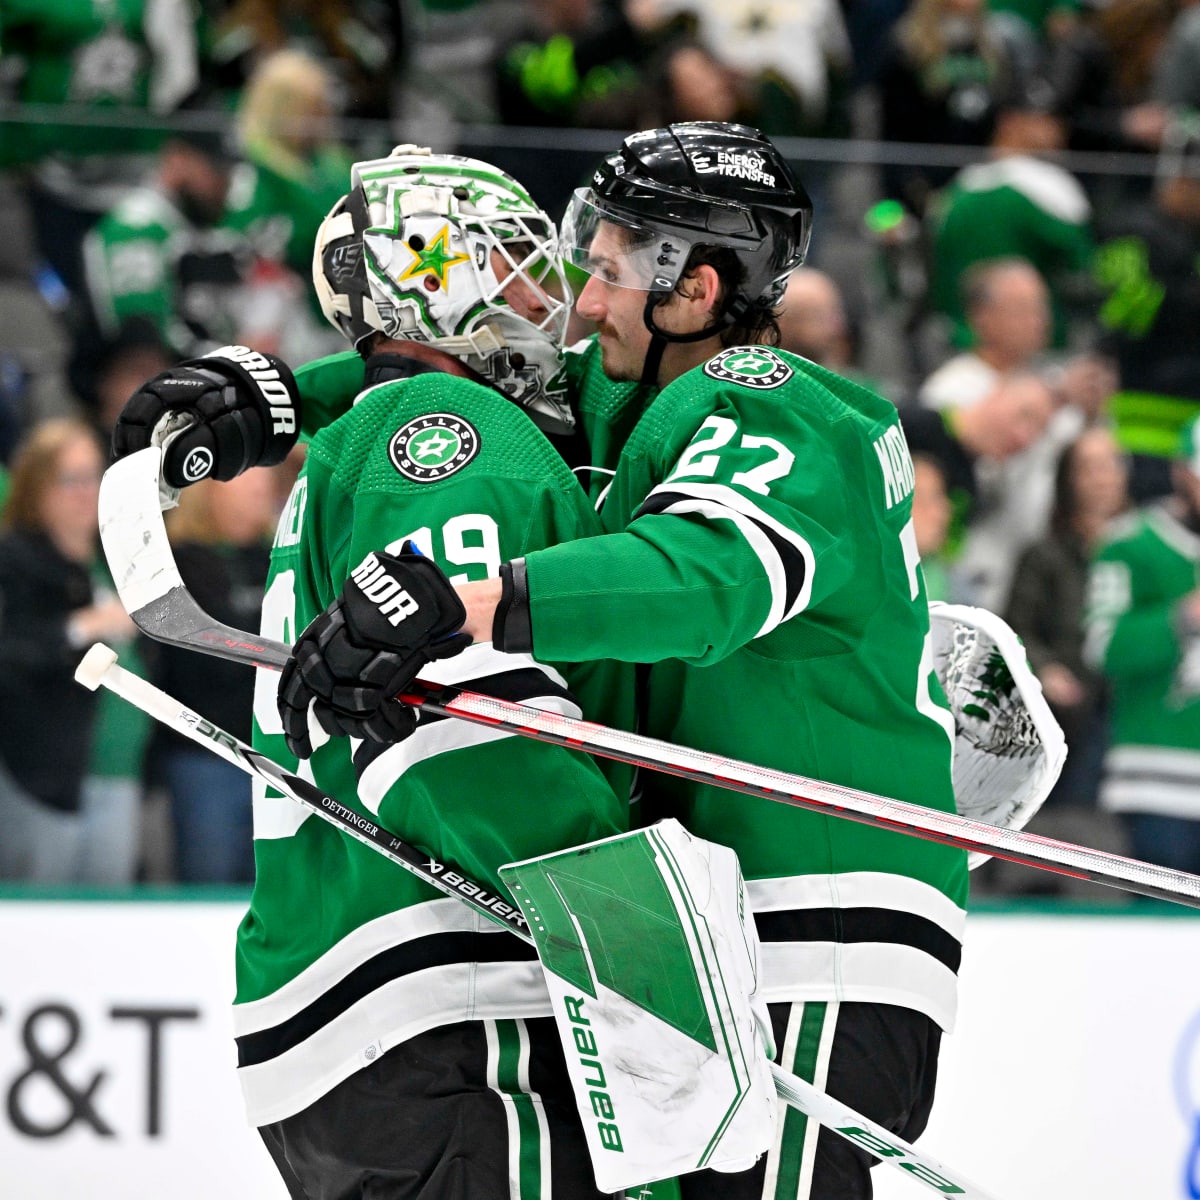 NHL playoffs: Some big stars not meeting expectations